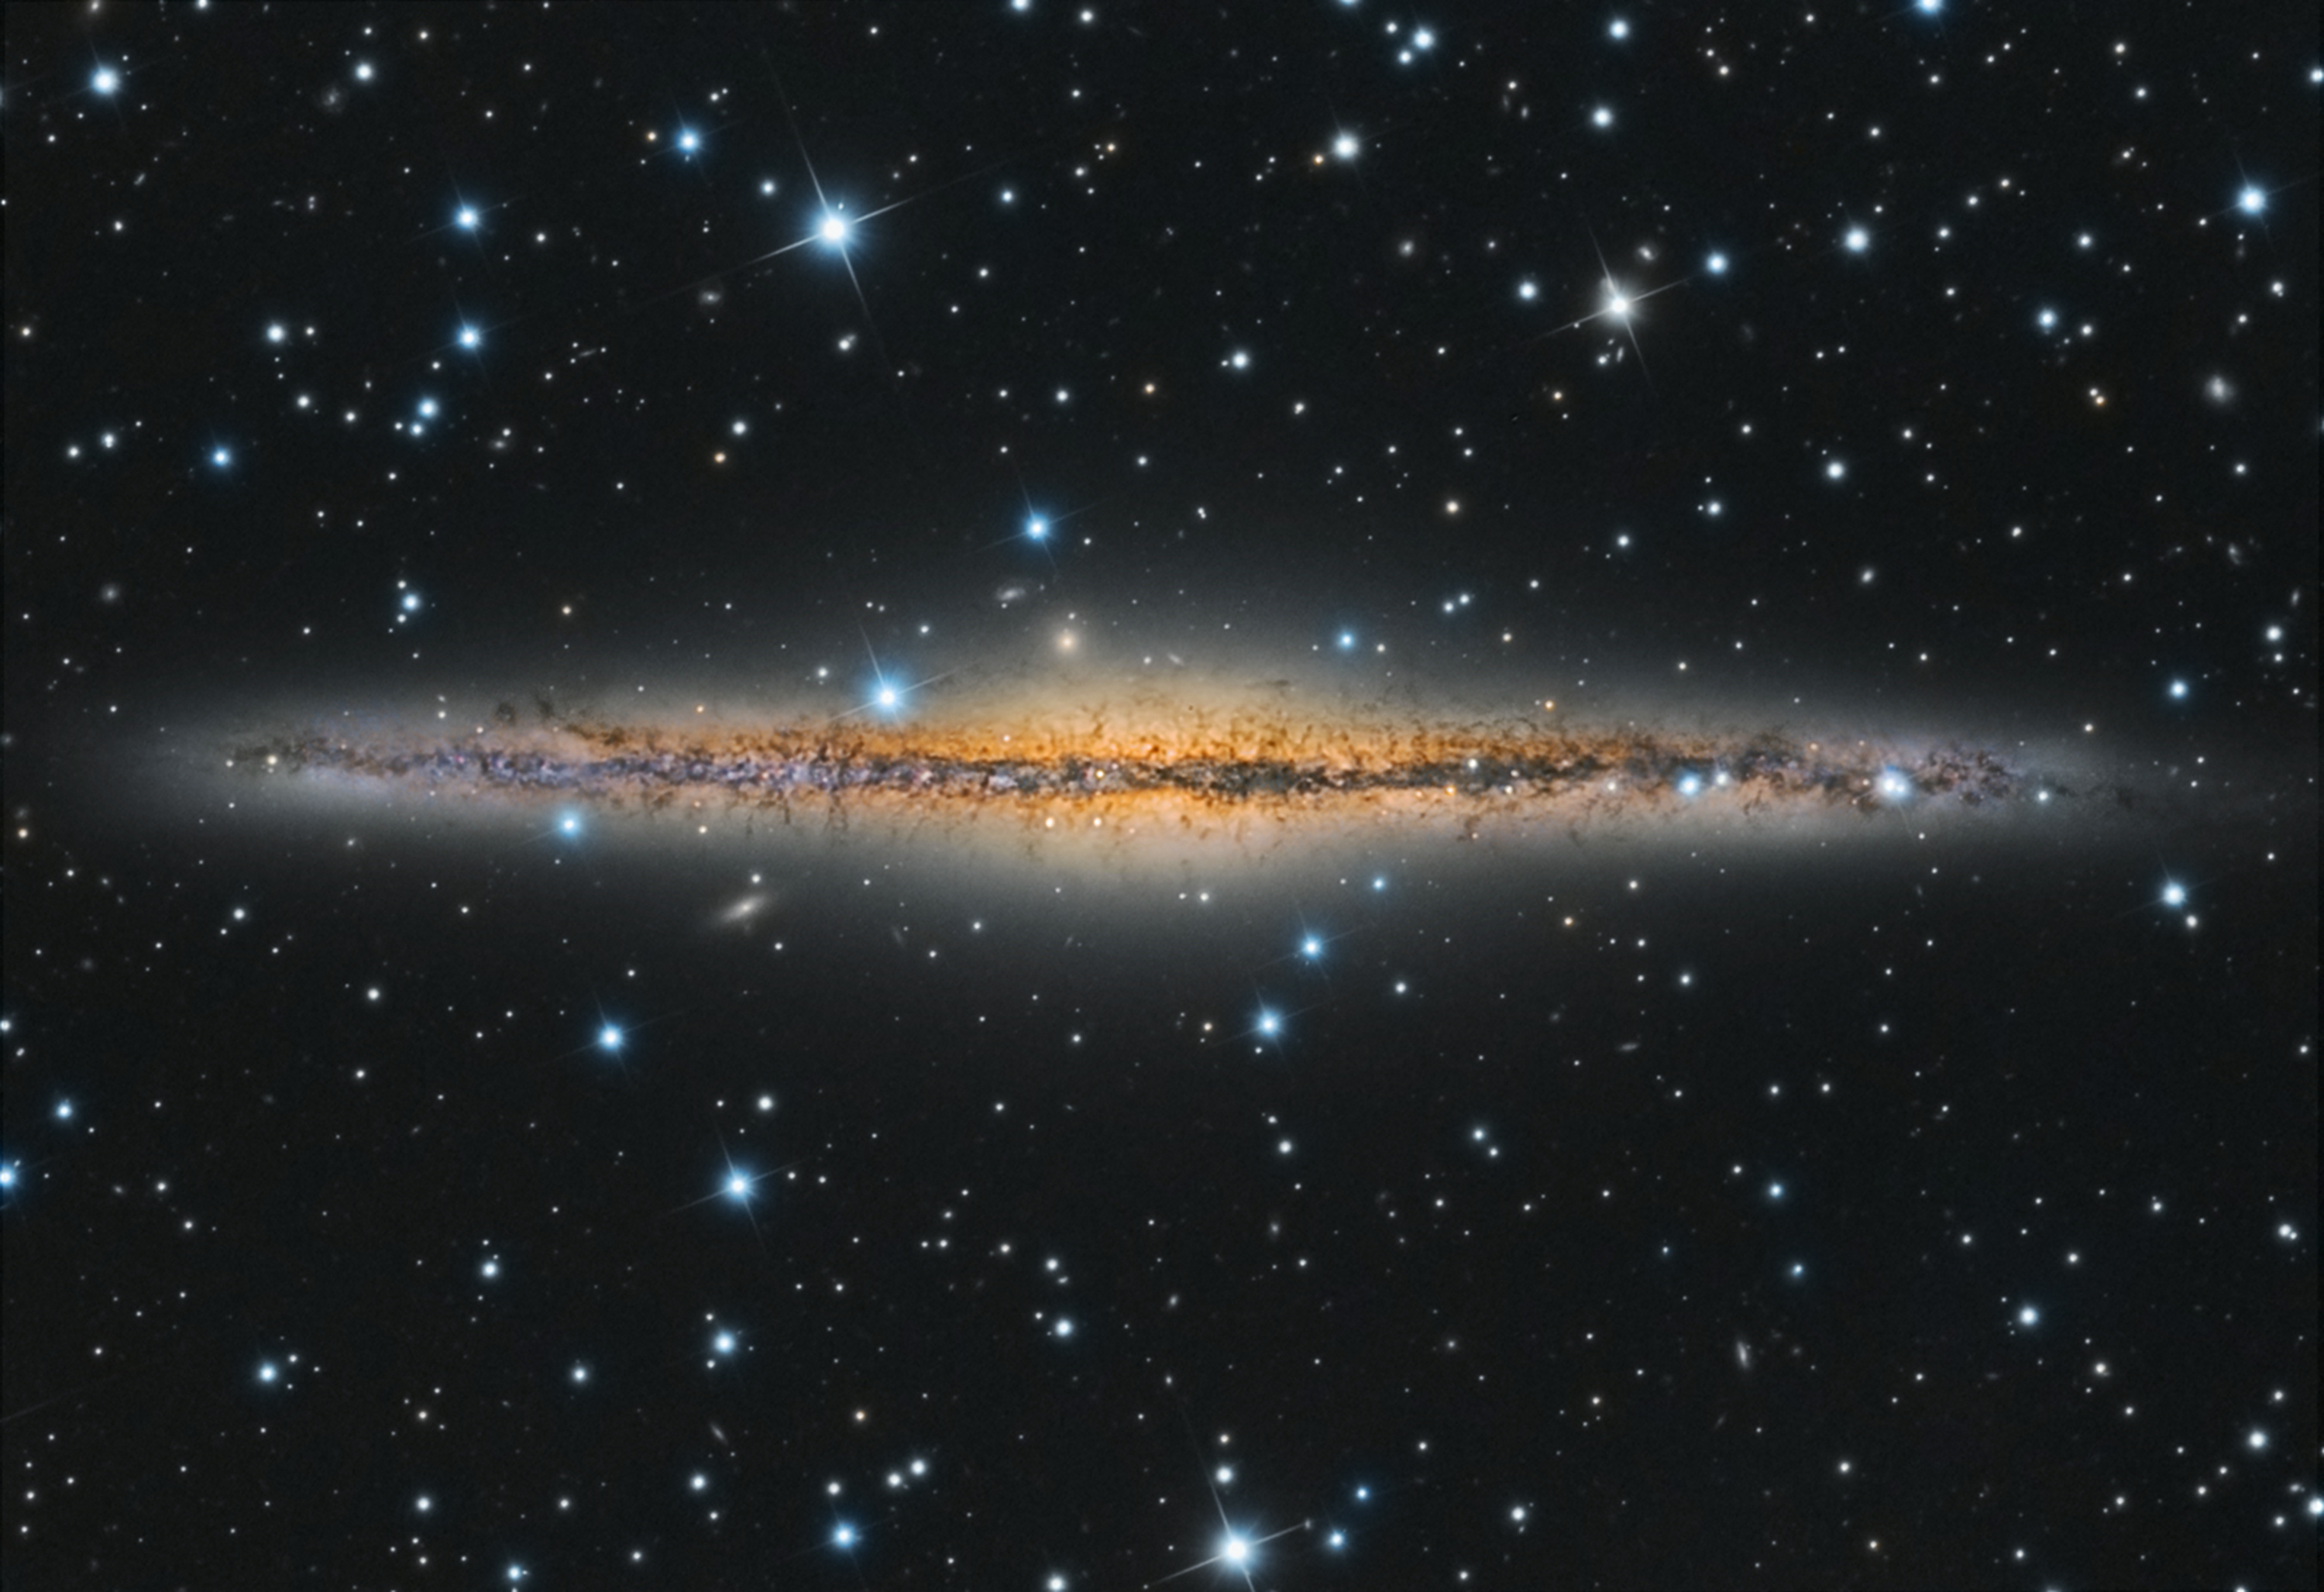 Astronomy Picture of the Day - Σελίδα 2 NGC891Falesiedi